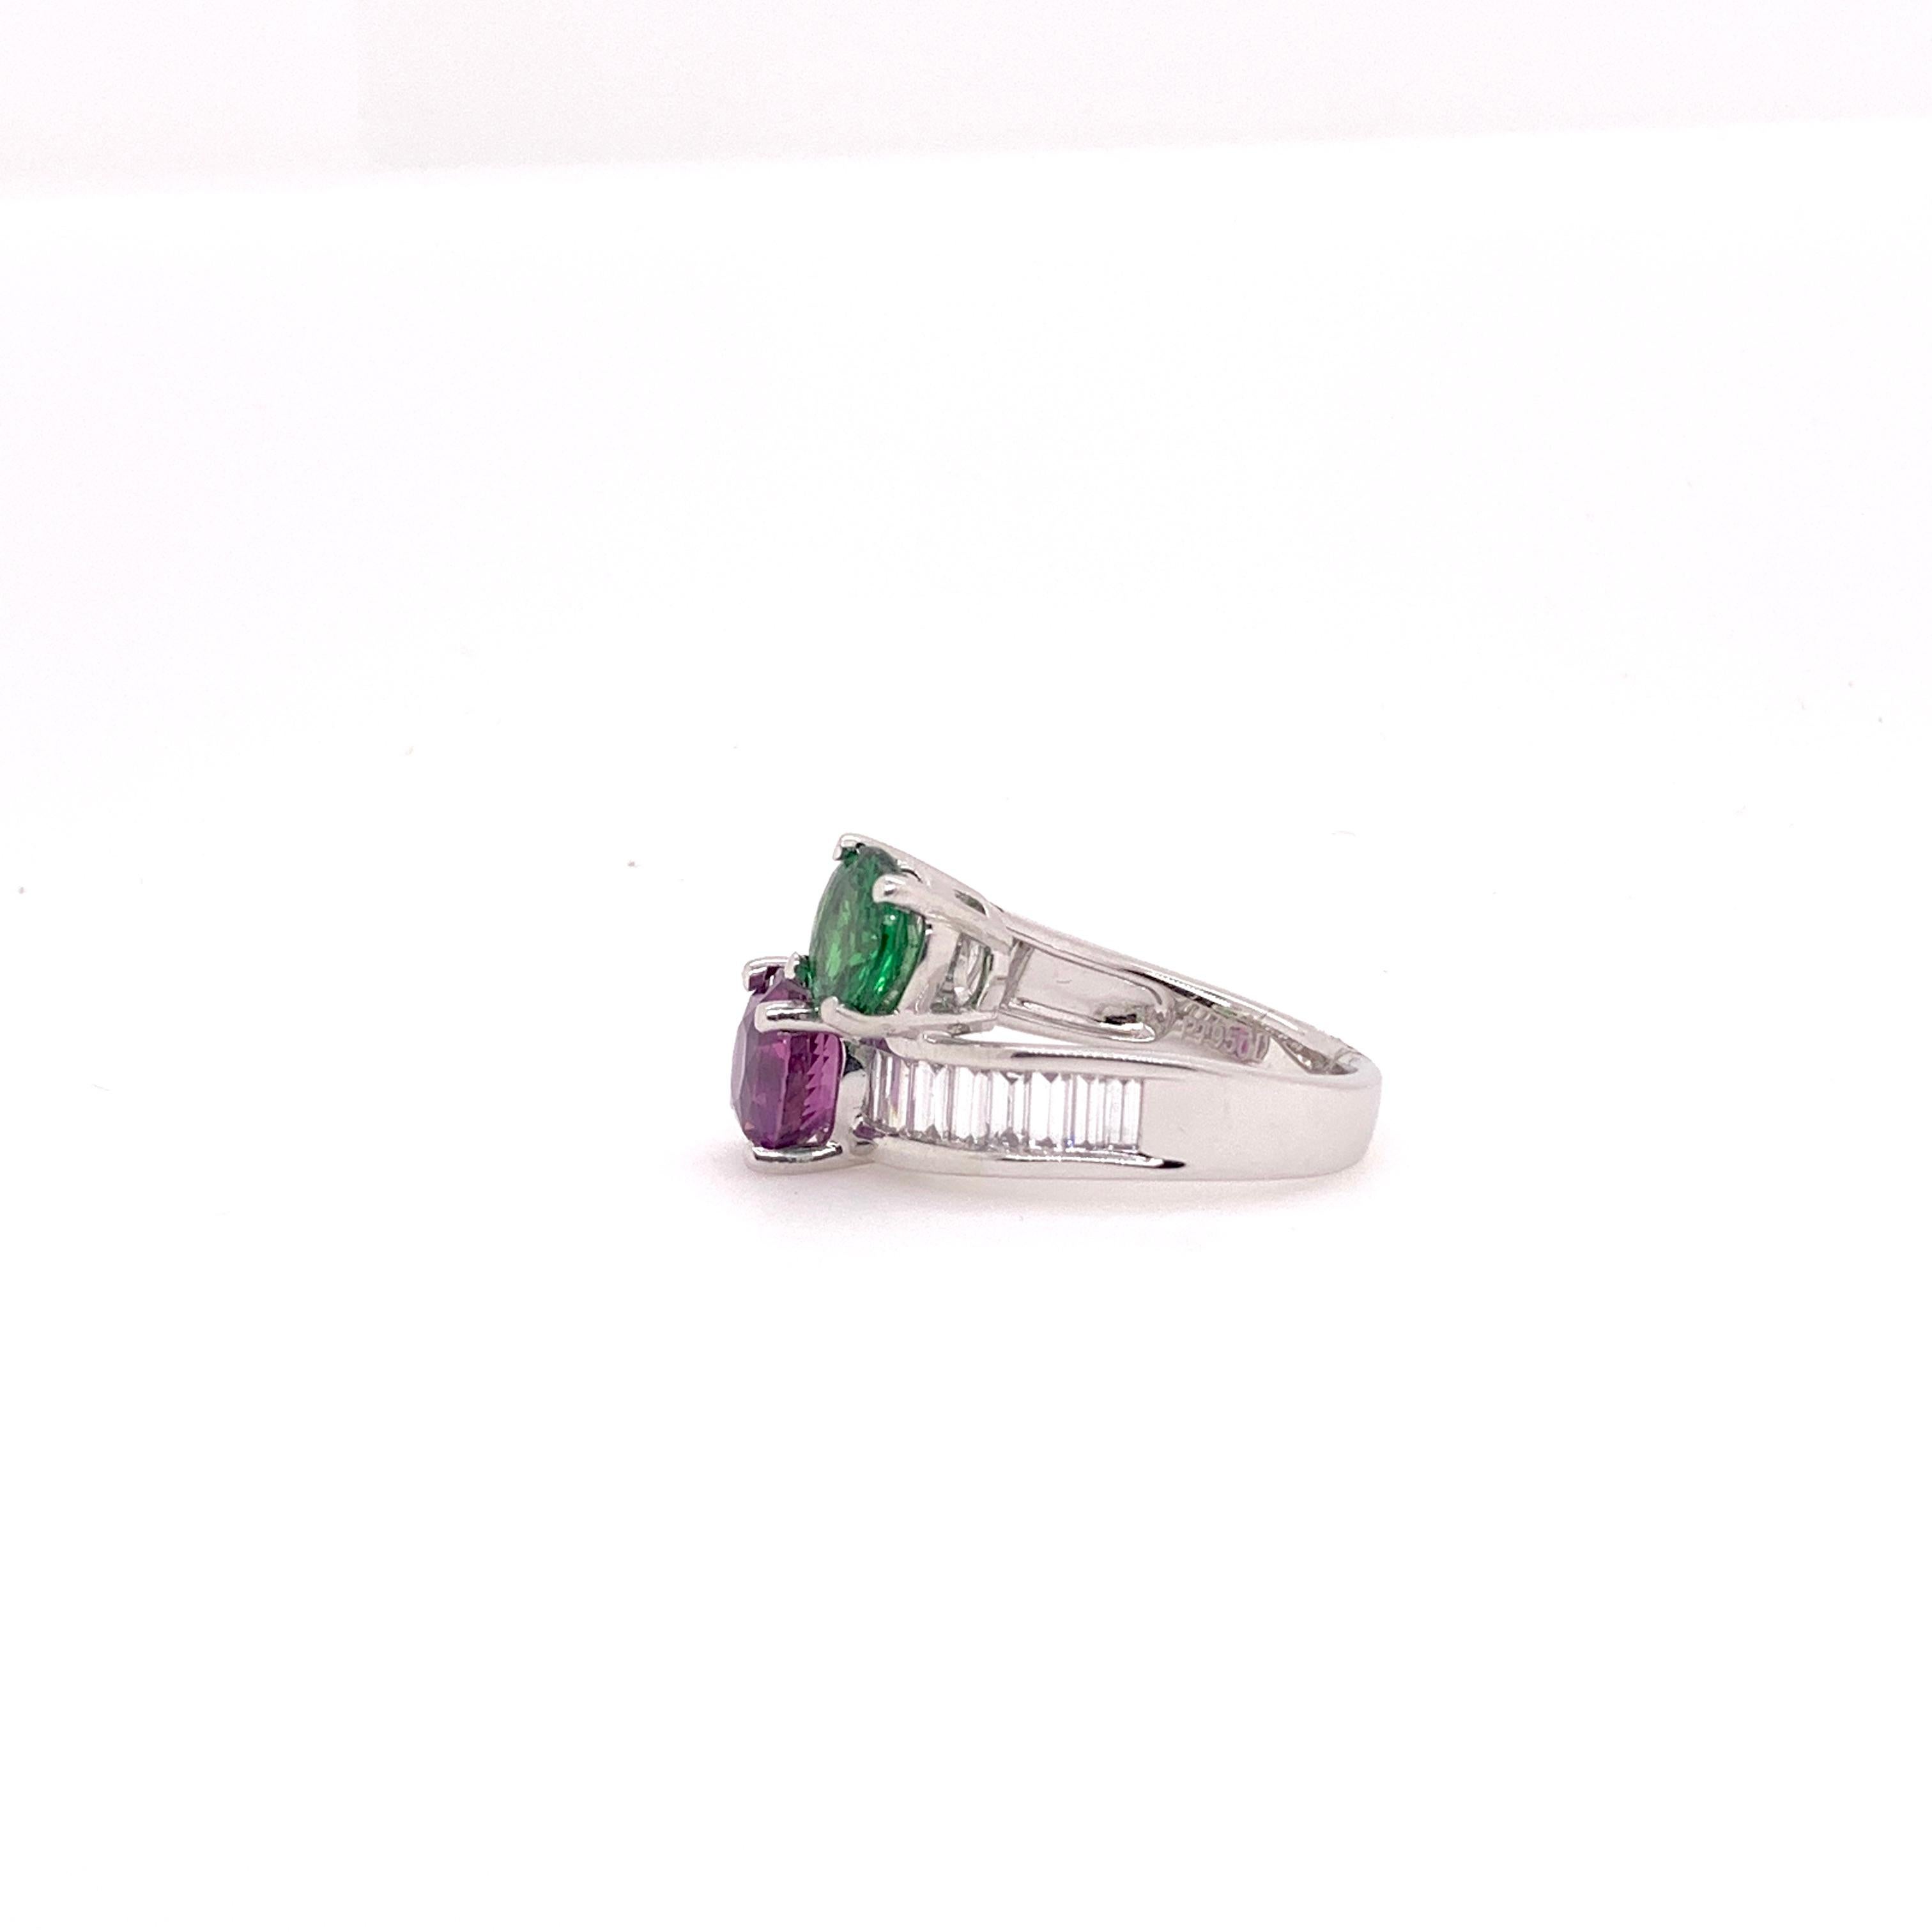 Contemporary GIA Certified Purple Pink Sapphire Tsavorite Diamond Cocktail Ring in Platinum For Sale